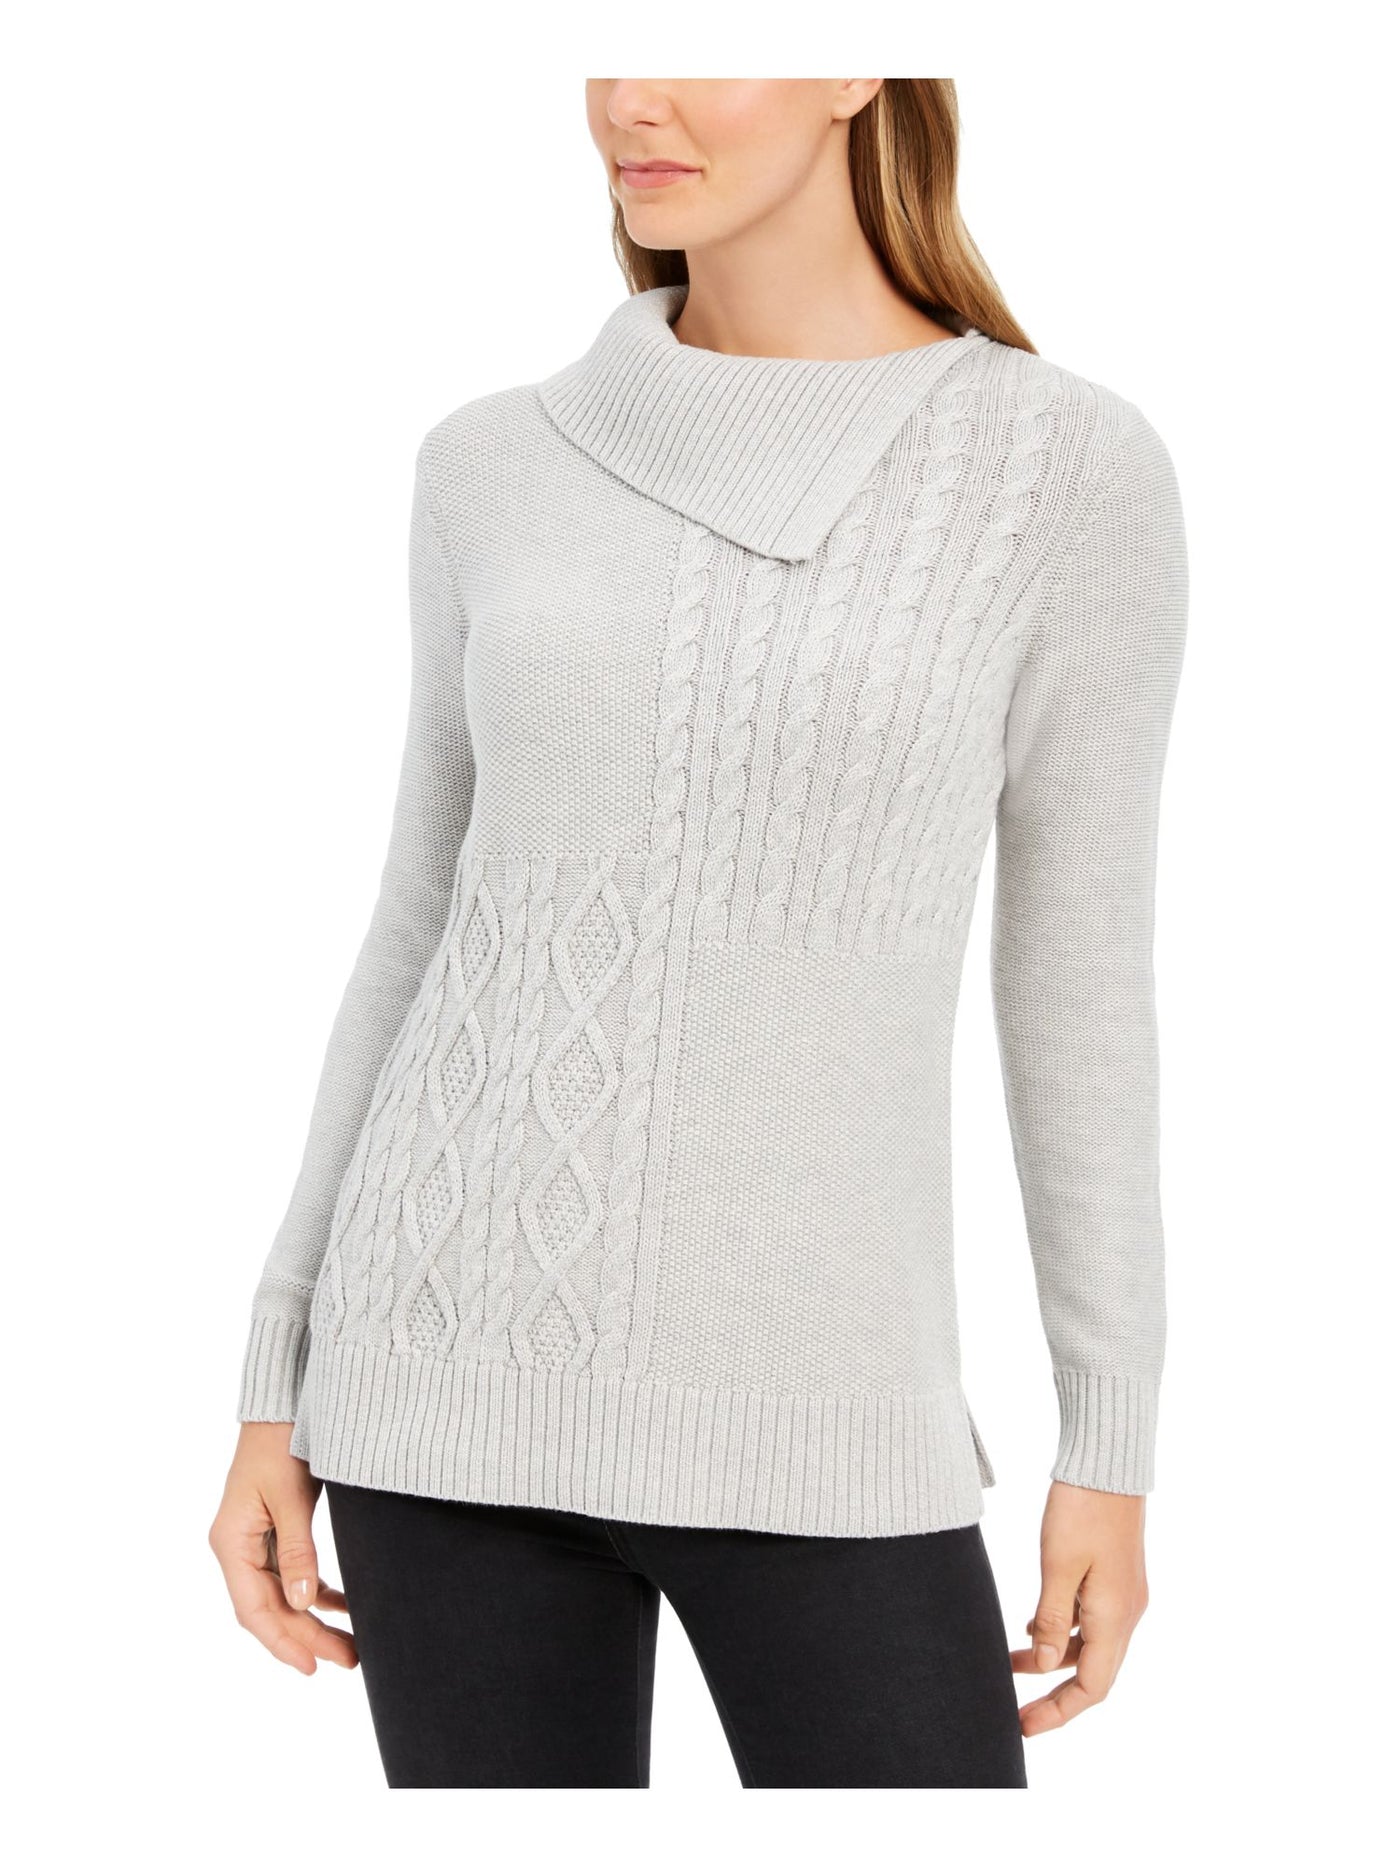 CHARTER CLUB Womens Ribbed Long Sleeve Cowl Neck Sweater